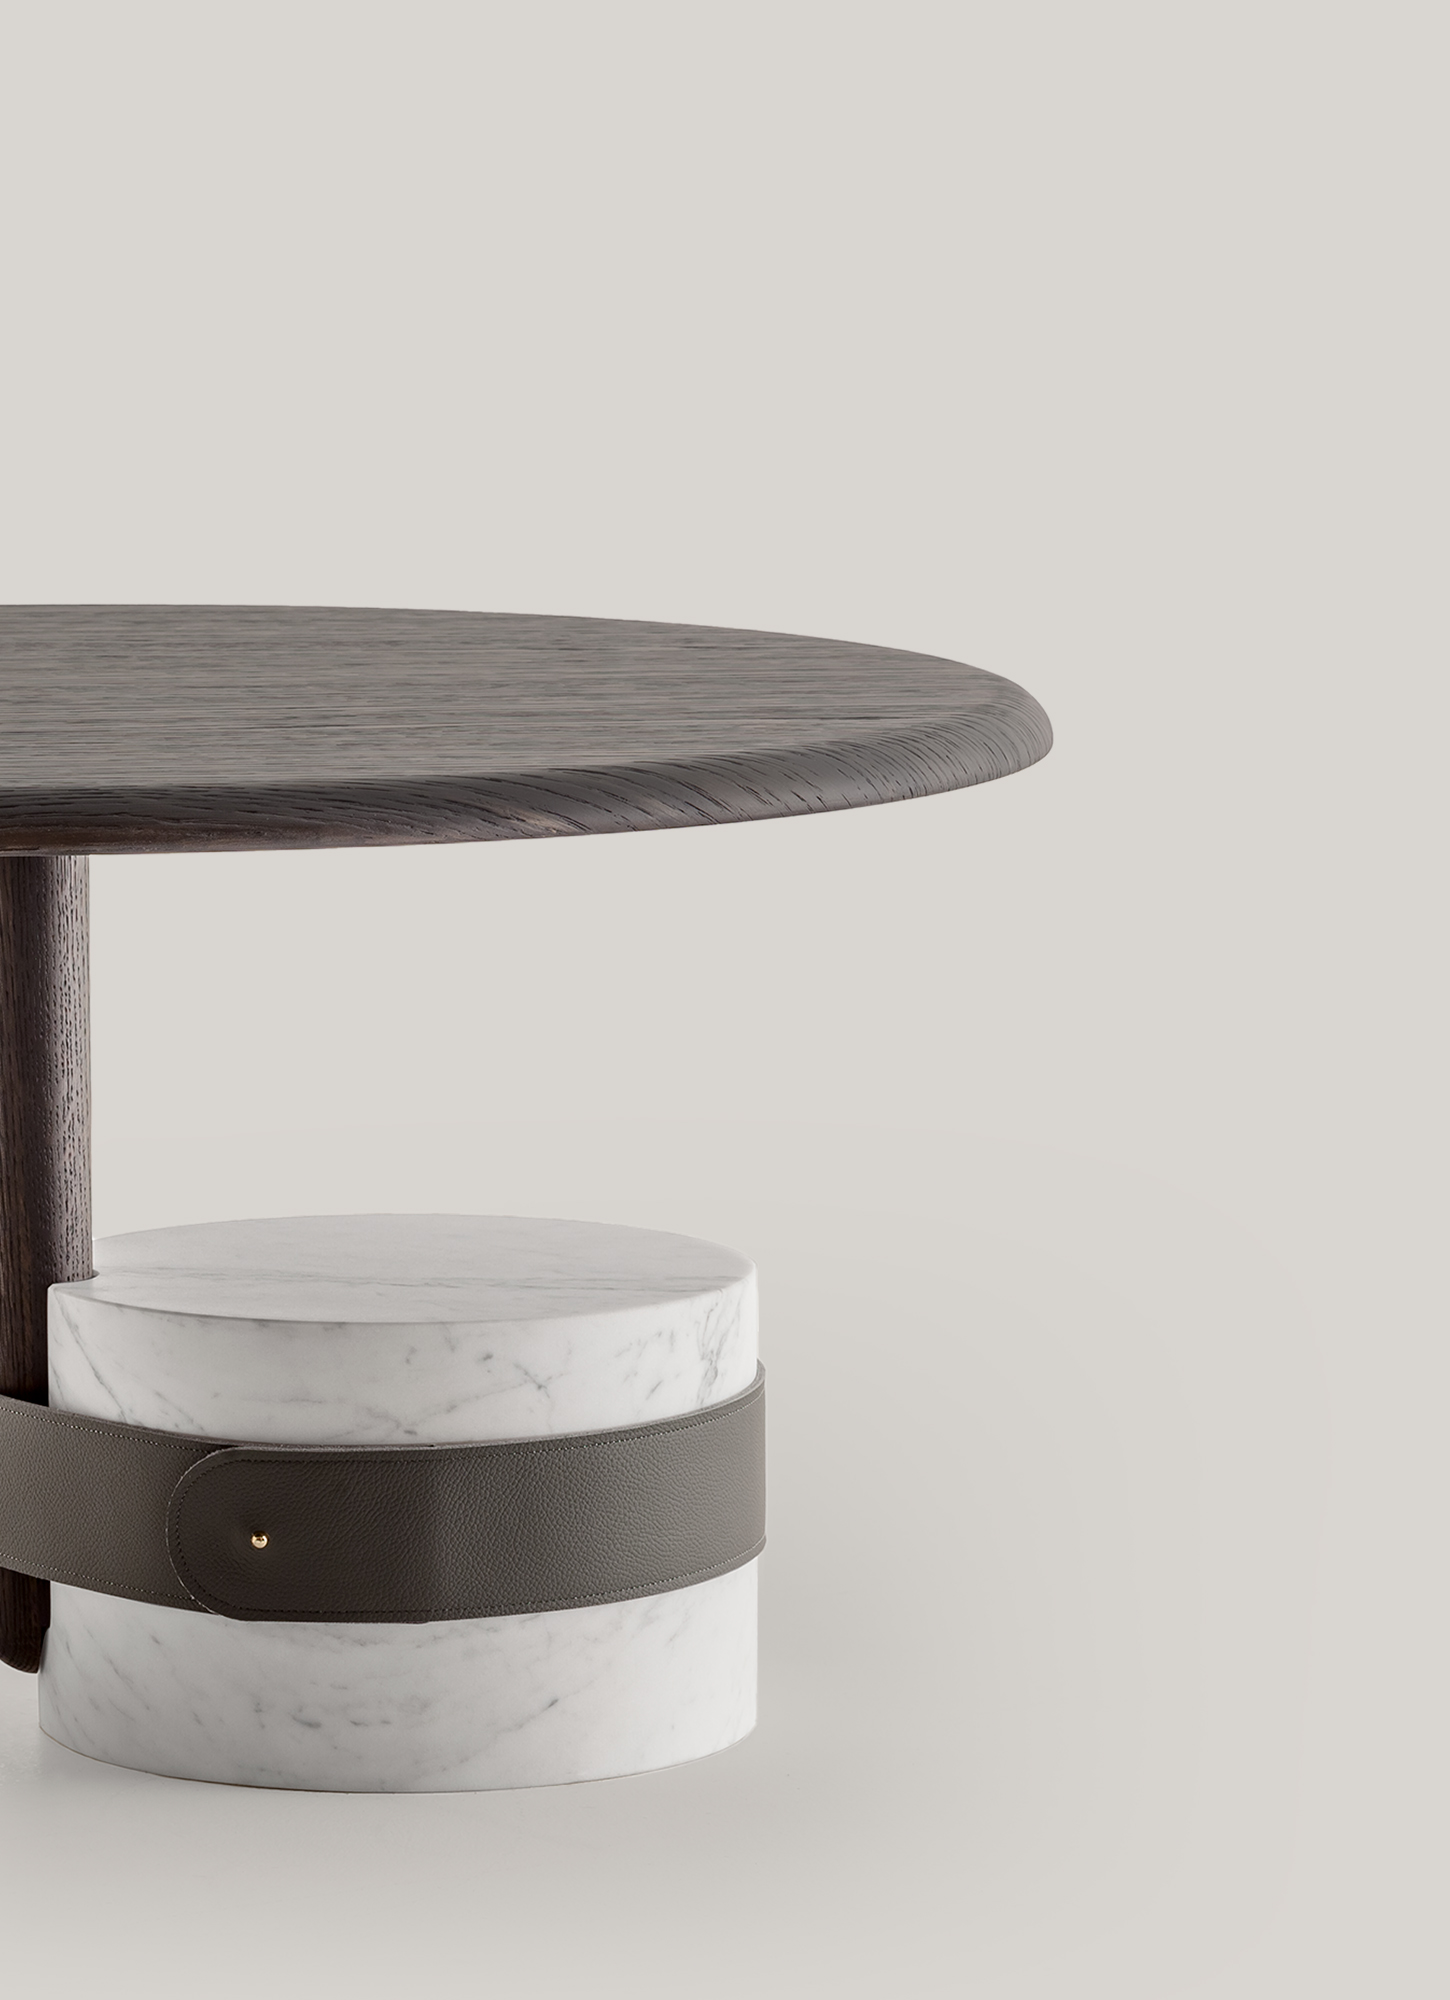 Detail of Champignon coffee table in real Carrara marble and Laguna oak wood by Morica Design